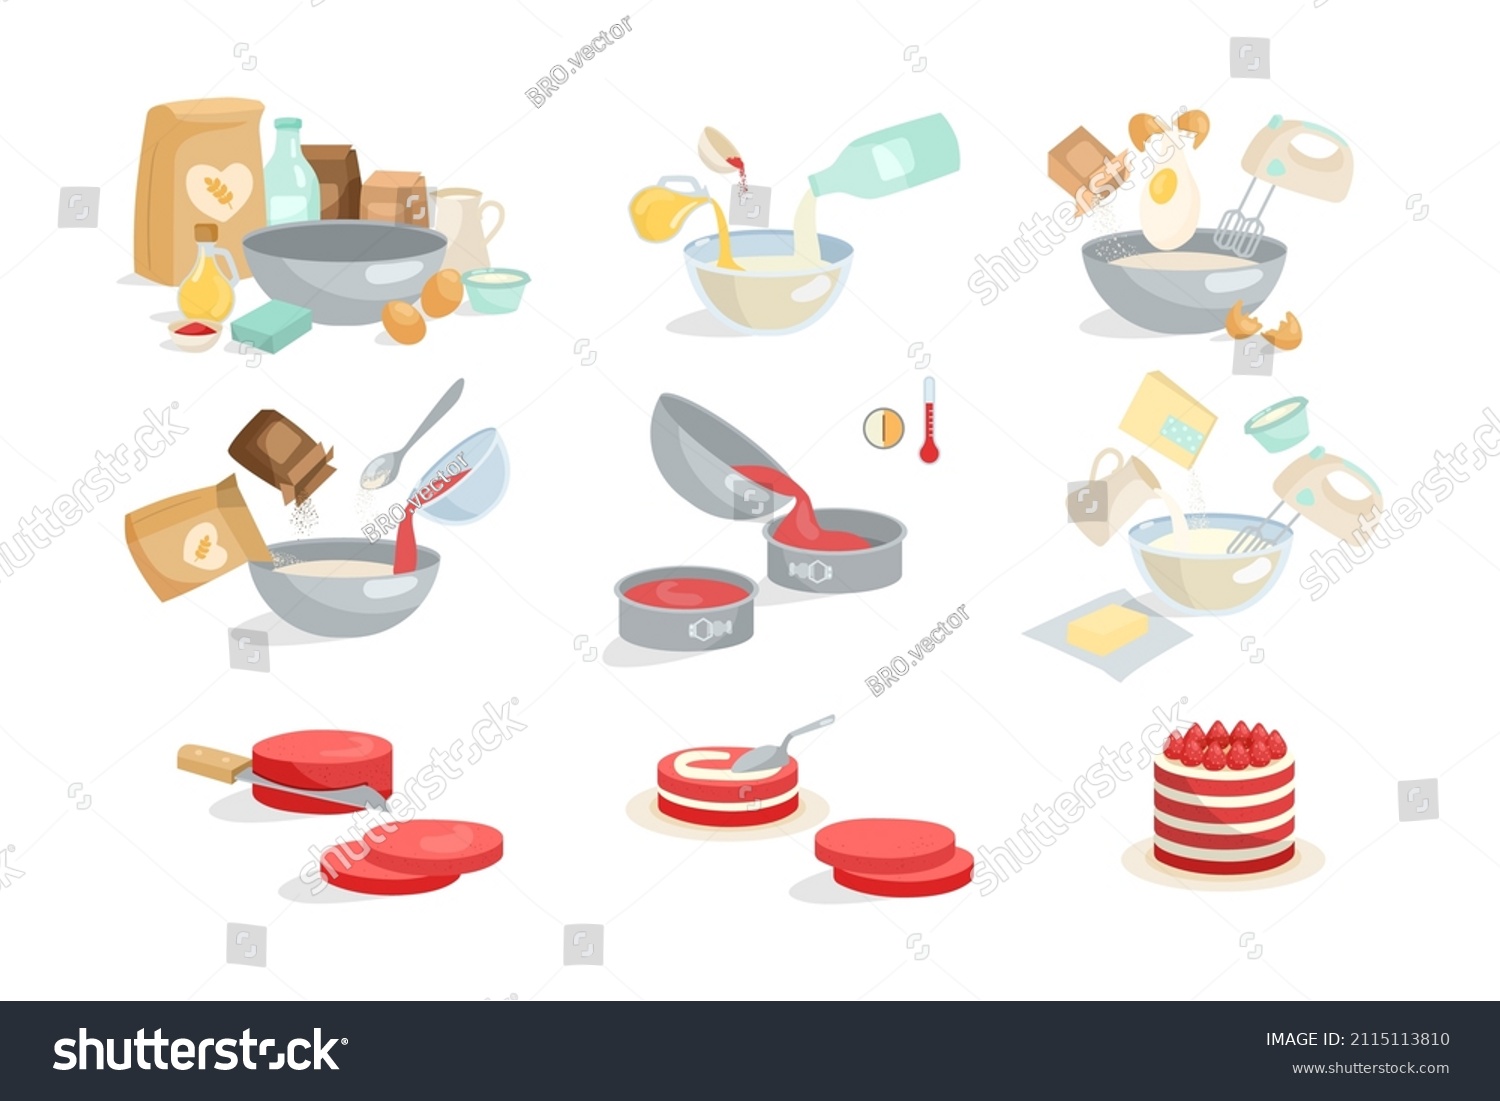 SVG of Process of cooking cake or pie cartoon illustration set. Adding ingredients in bowl step by step, mixing eggs, flour, sugar with blender, preparing dough, baking sweet dessert. Preparation concept svg